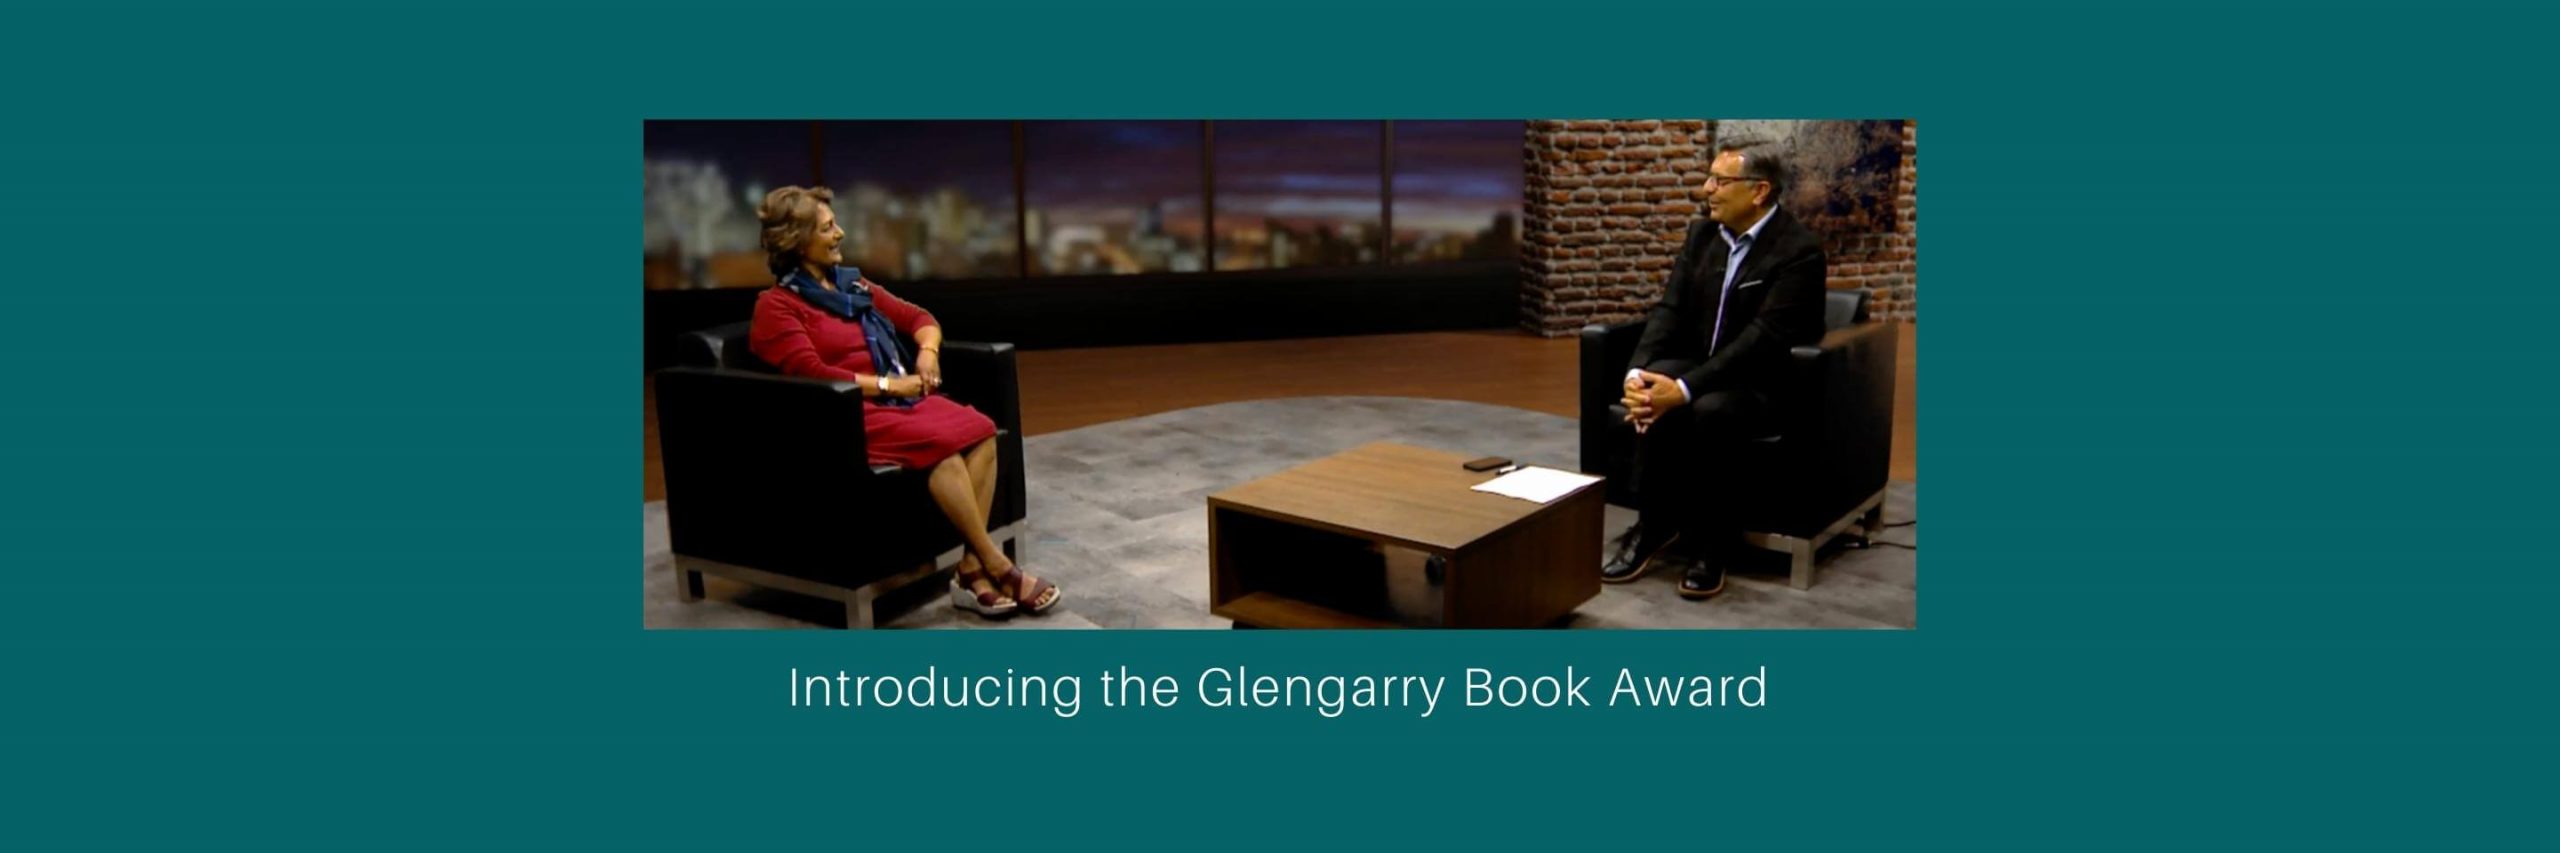 The Saskatchewan Foundation For the Arts has a surprise for Canadian authors with Saskatchewan roots and invites them to apply for the inaugural Glengarry Book Award prize of ,000. Costa Maragos chatted with Gursh Barnard, Chair of the Foundation’s Board of Trustees to tell us about the largest prize available to authors on the prairies. Click the link to watch In Real Time with Costa Maragos. https://www.youtube.com/watch?v=Gq9qll-CTOw